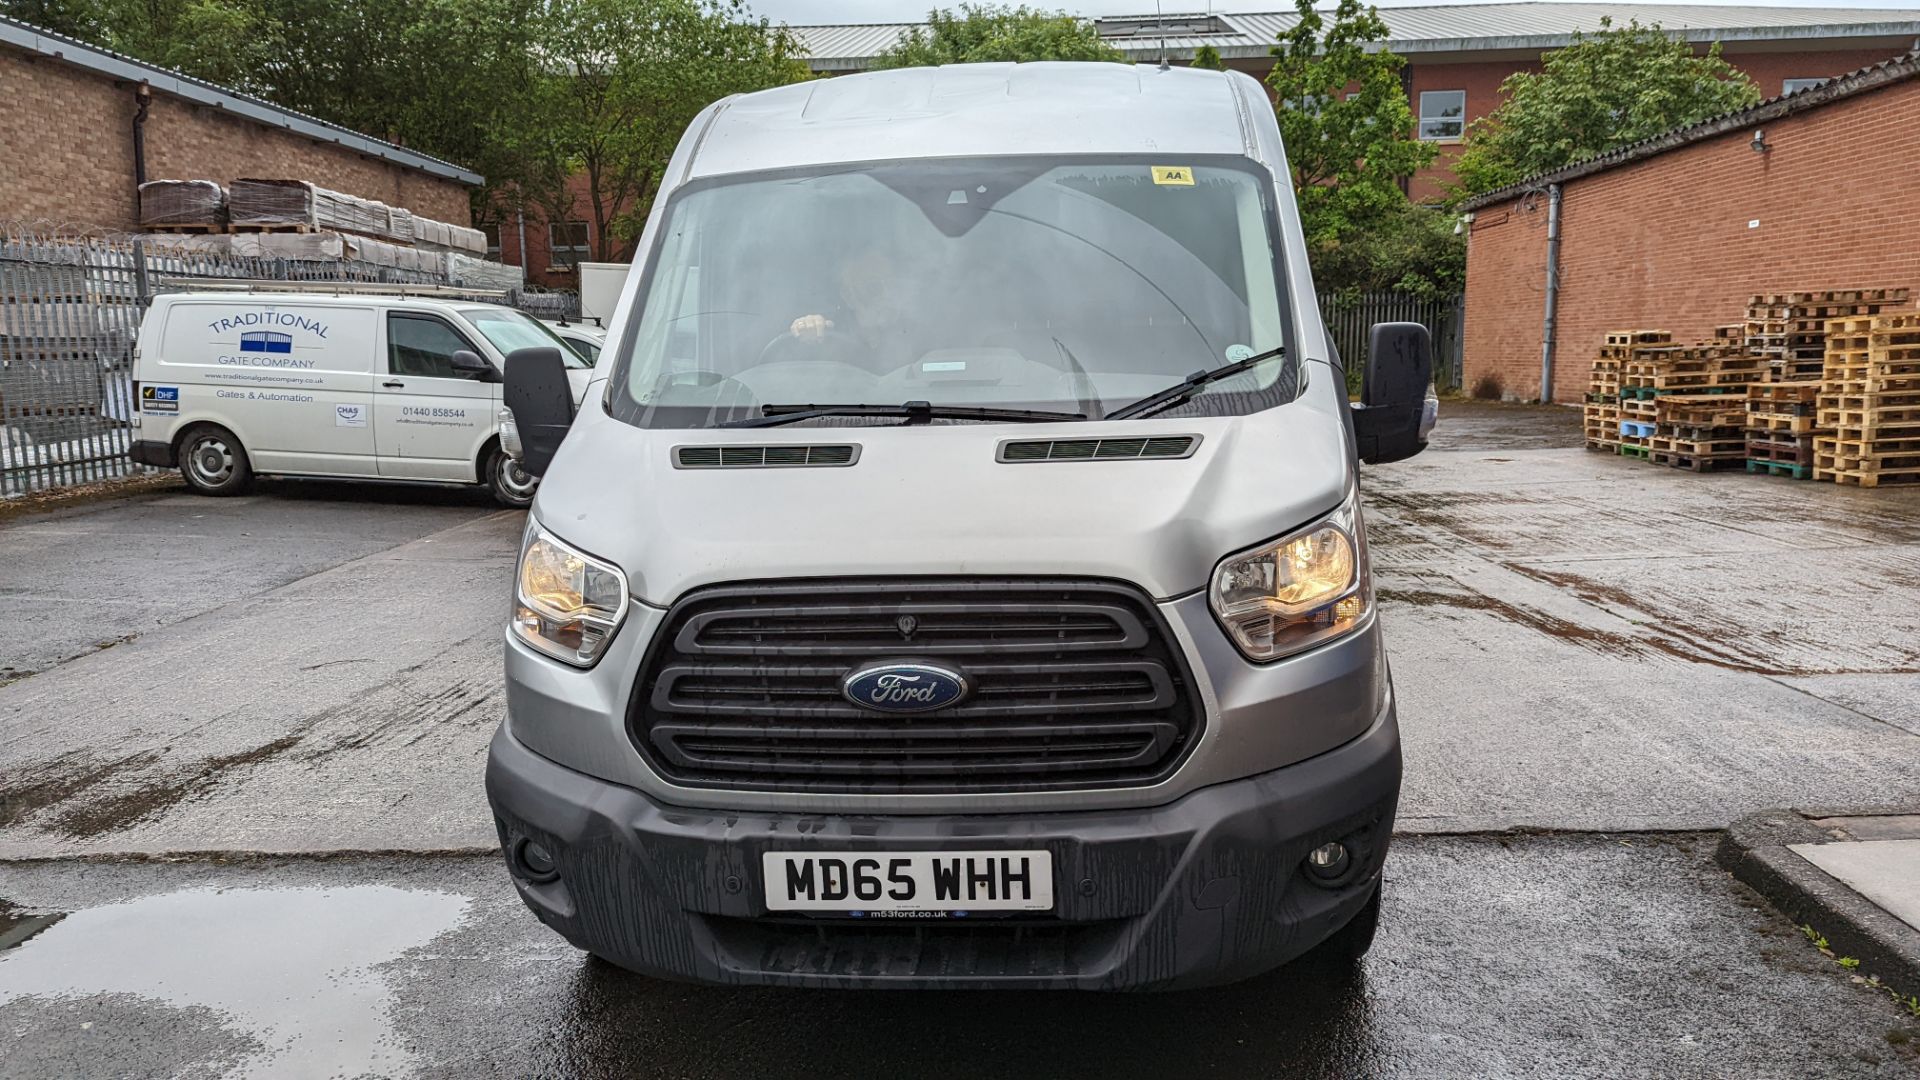 MD65 WHH Ford Transit 350, 6-speed manual gearbox, 2198cc diesel engine, 5981mm x 2550mm. Colour: Si - Image 6 of 51